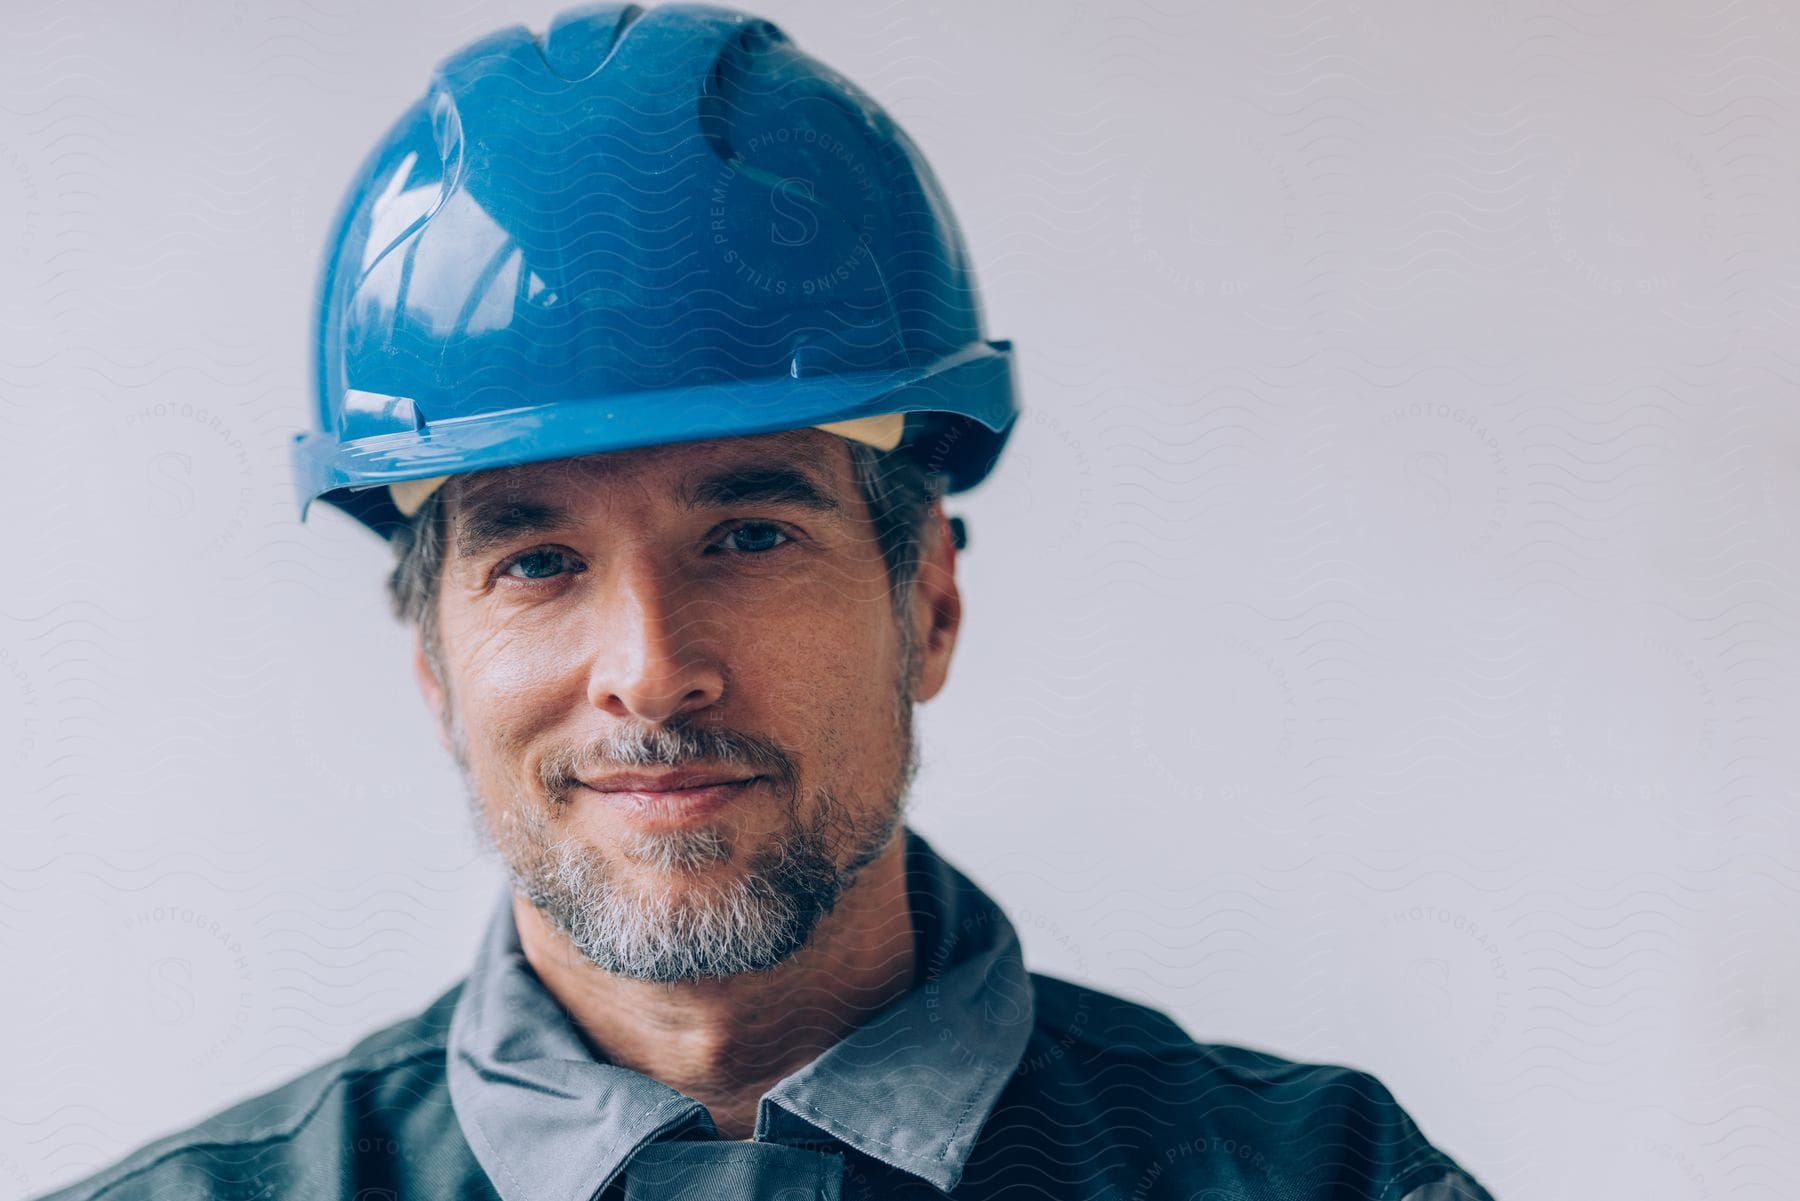 Portrait of a man with a blue protective helmet.